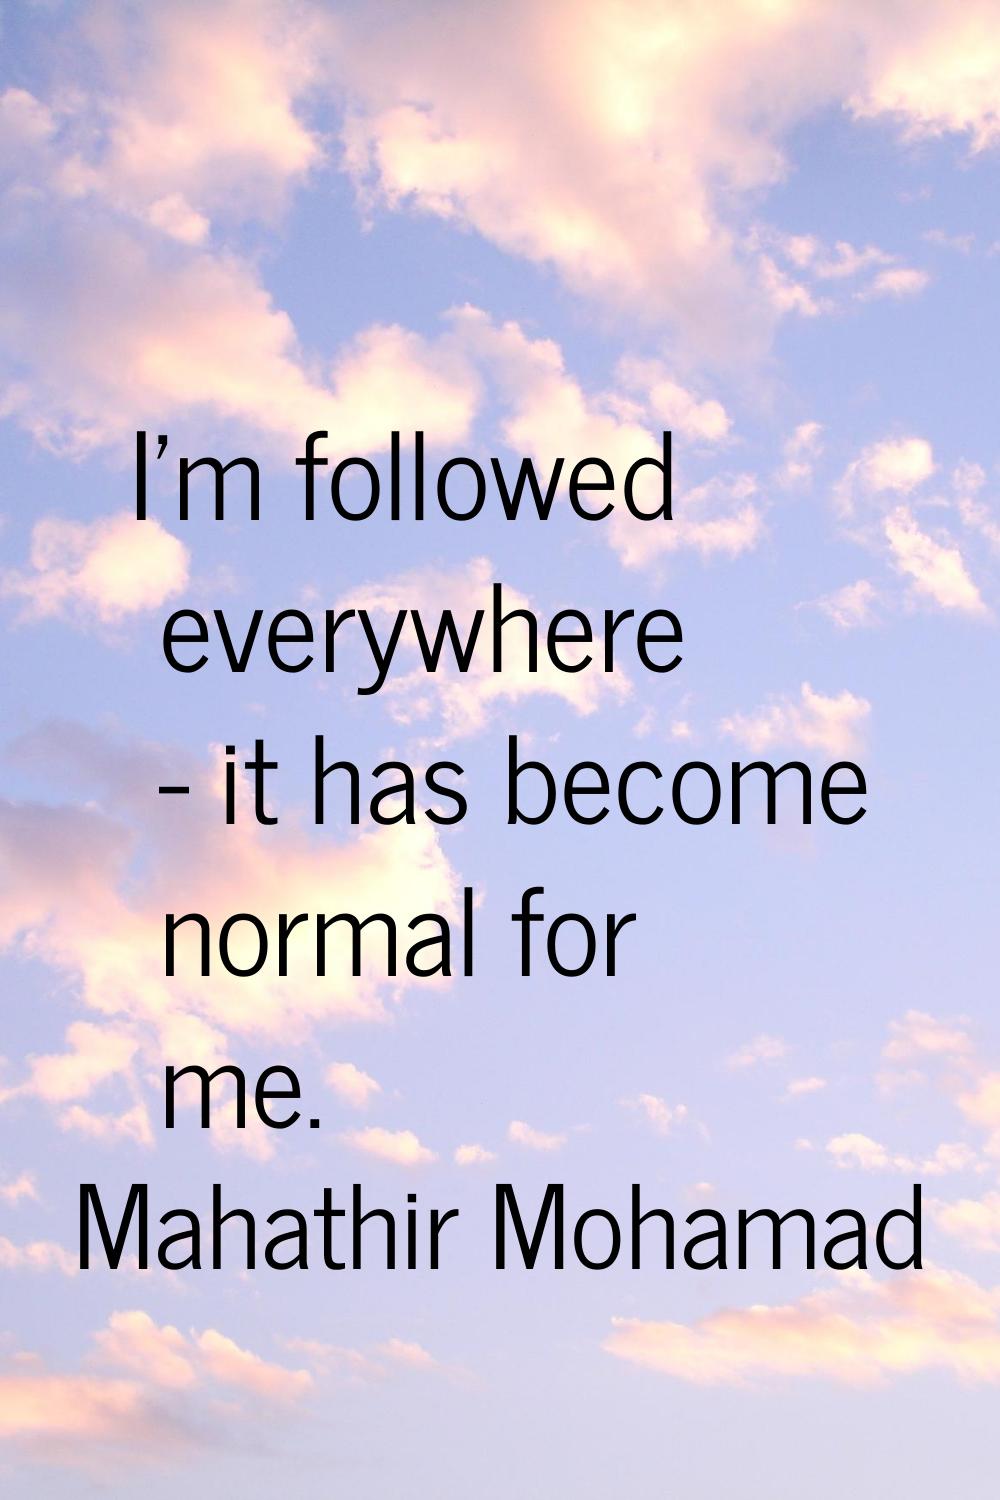 I'm followed everywhere - it has become normal for me.